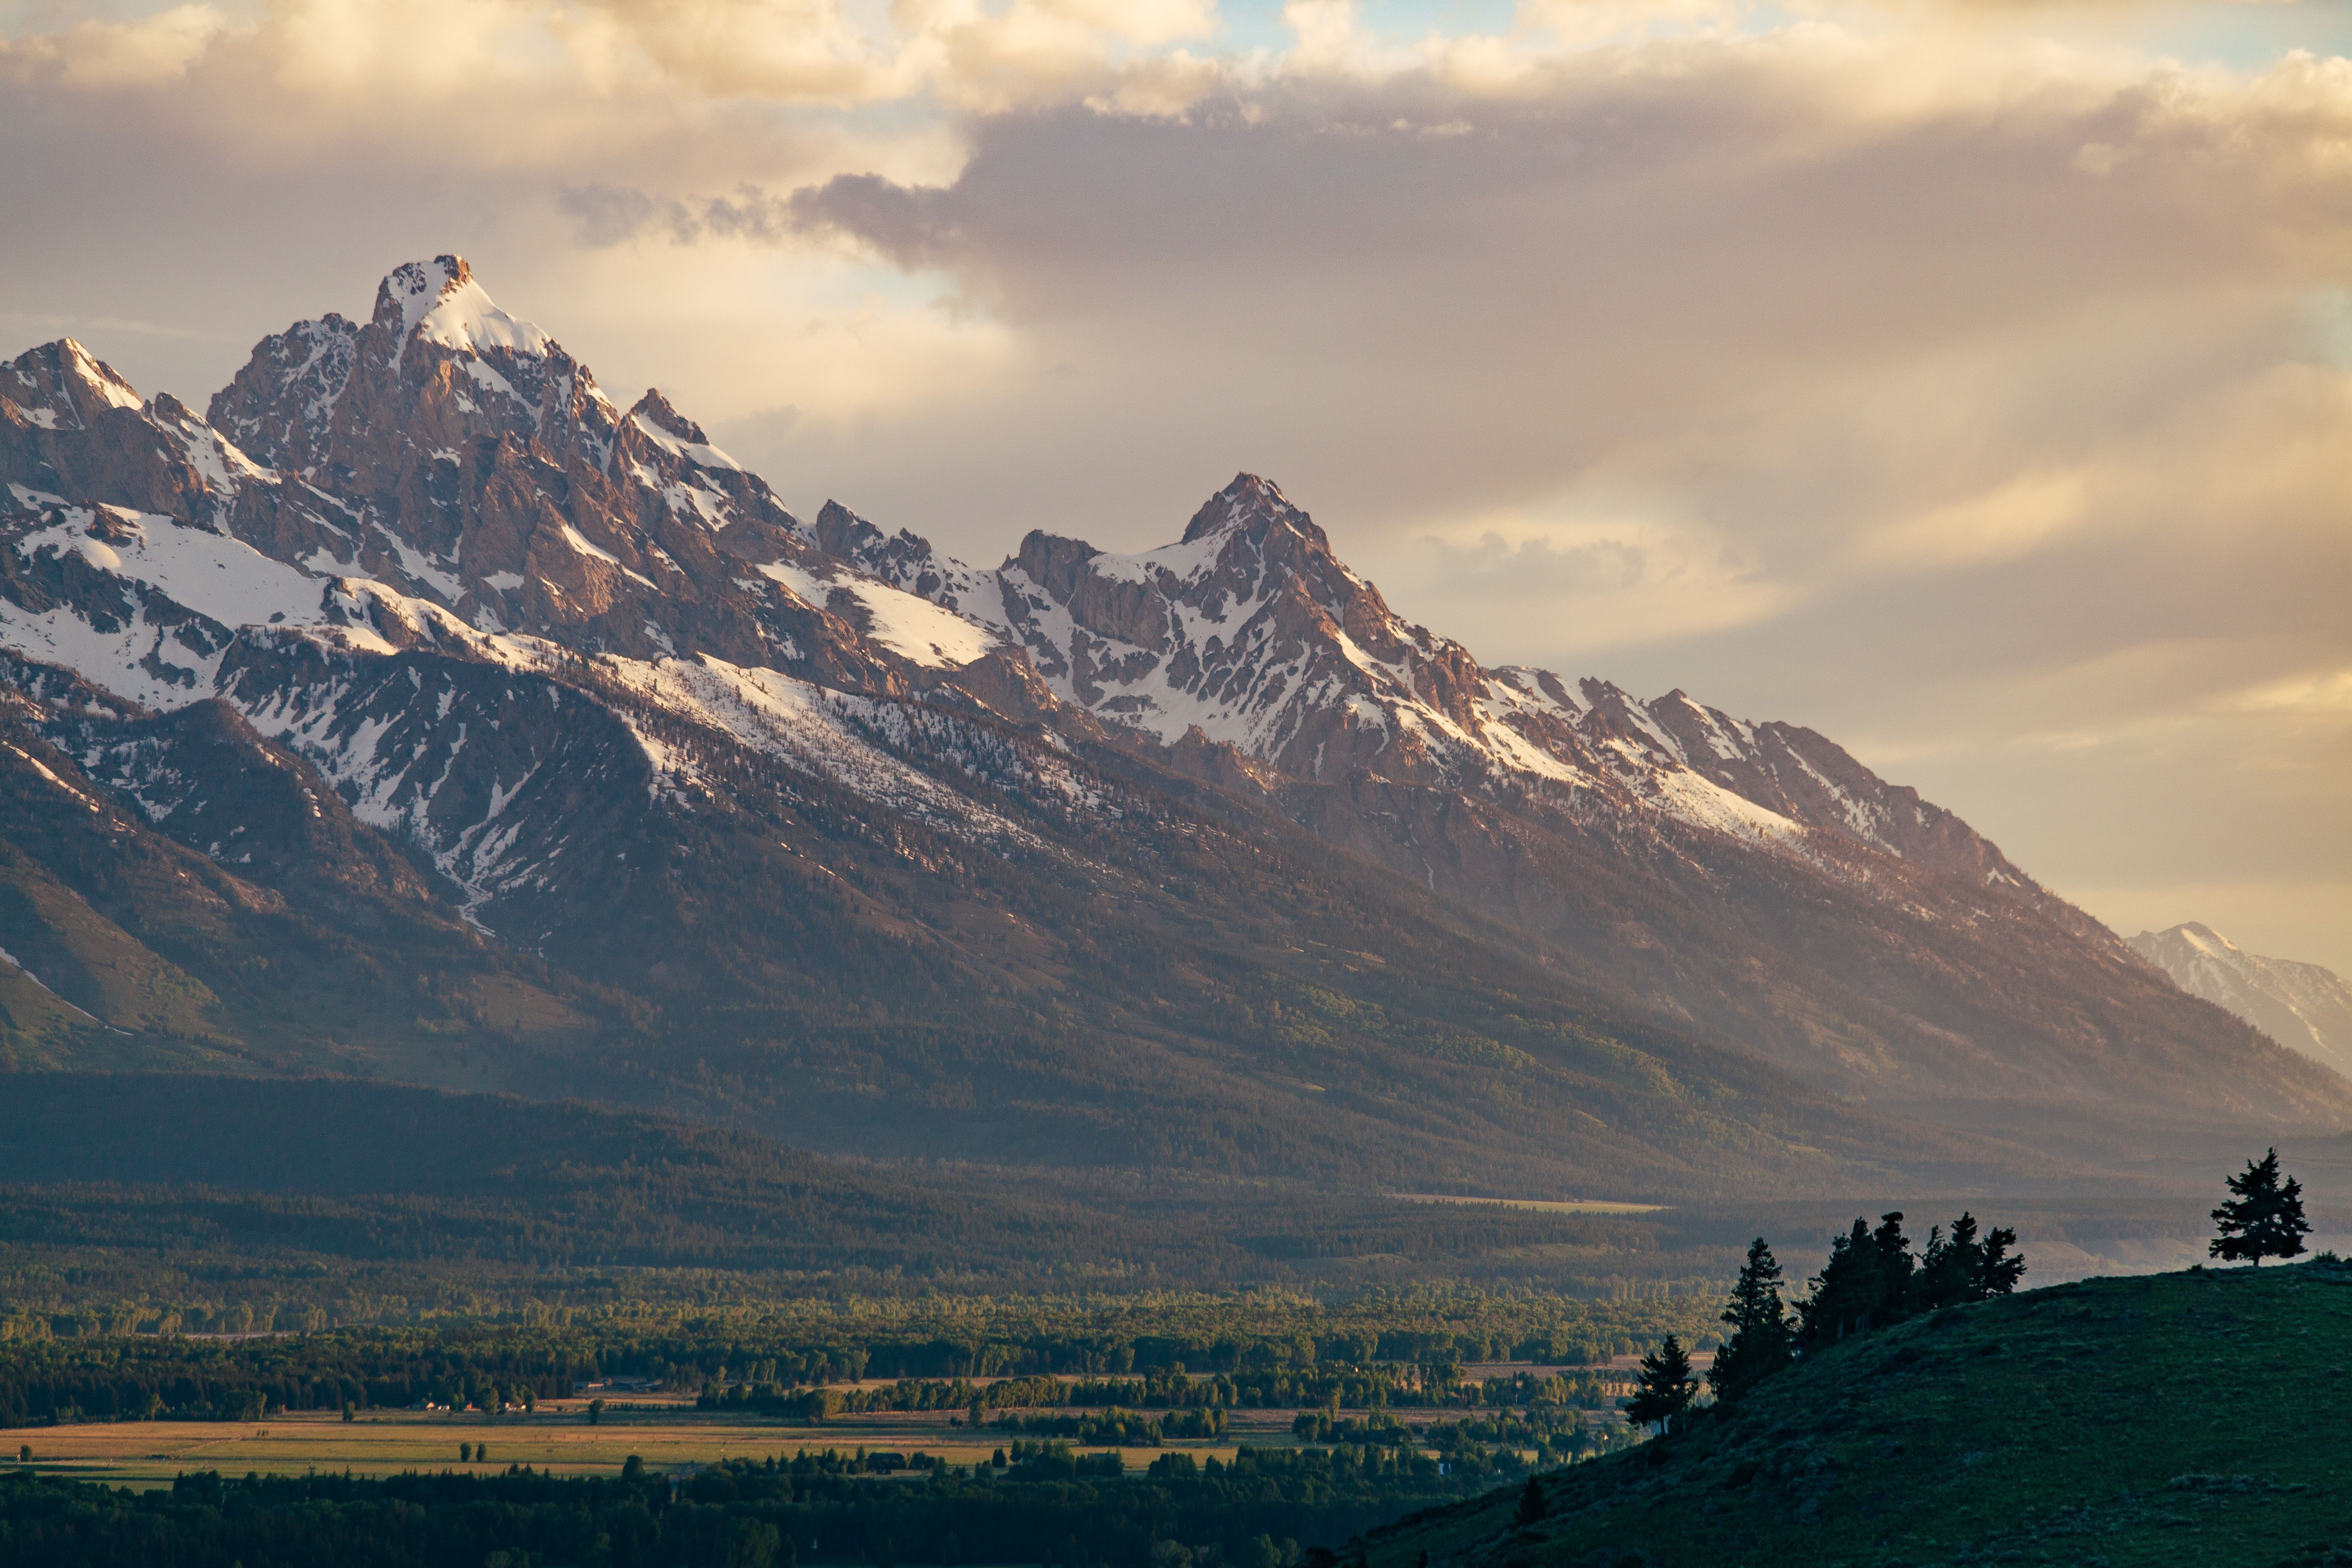 A scenic view of the Grand Tetons.